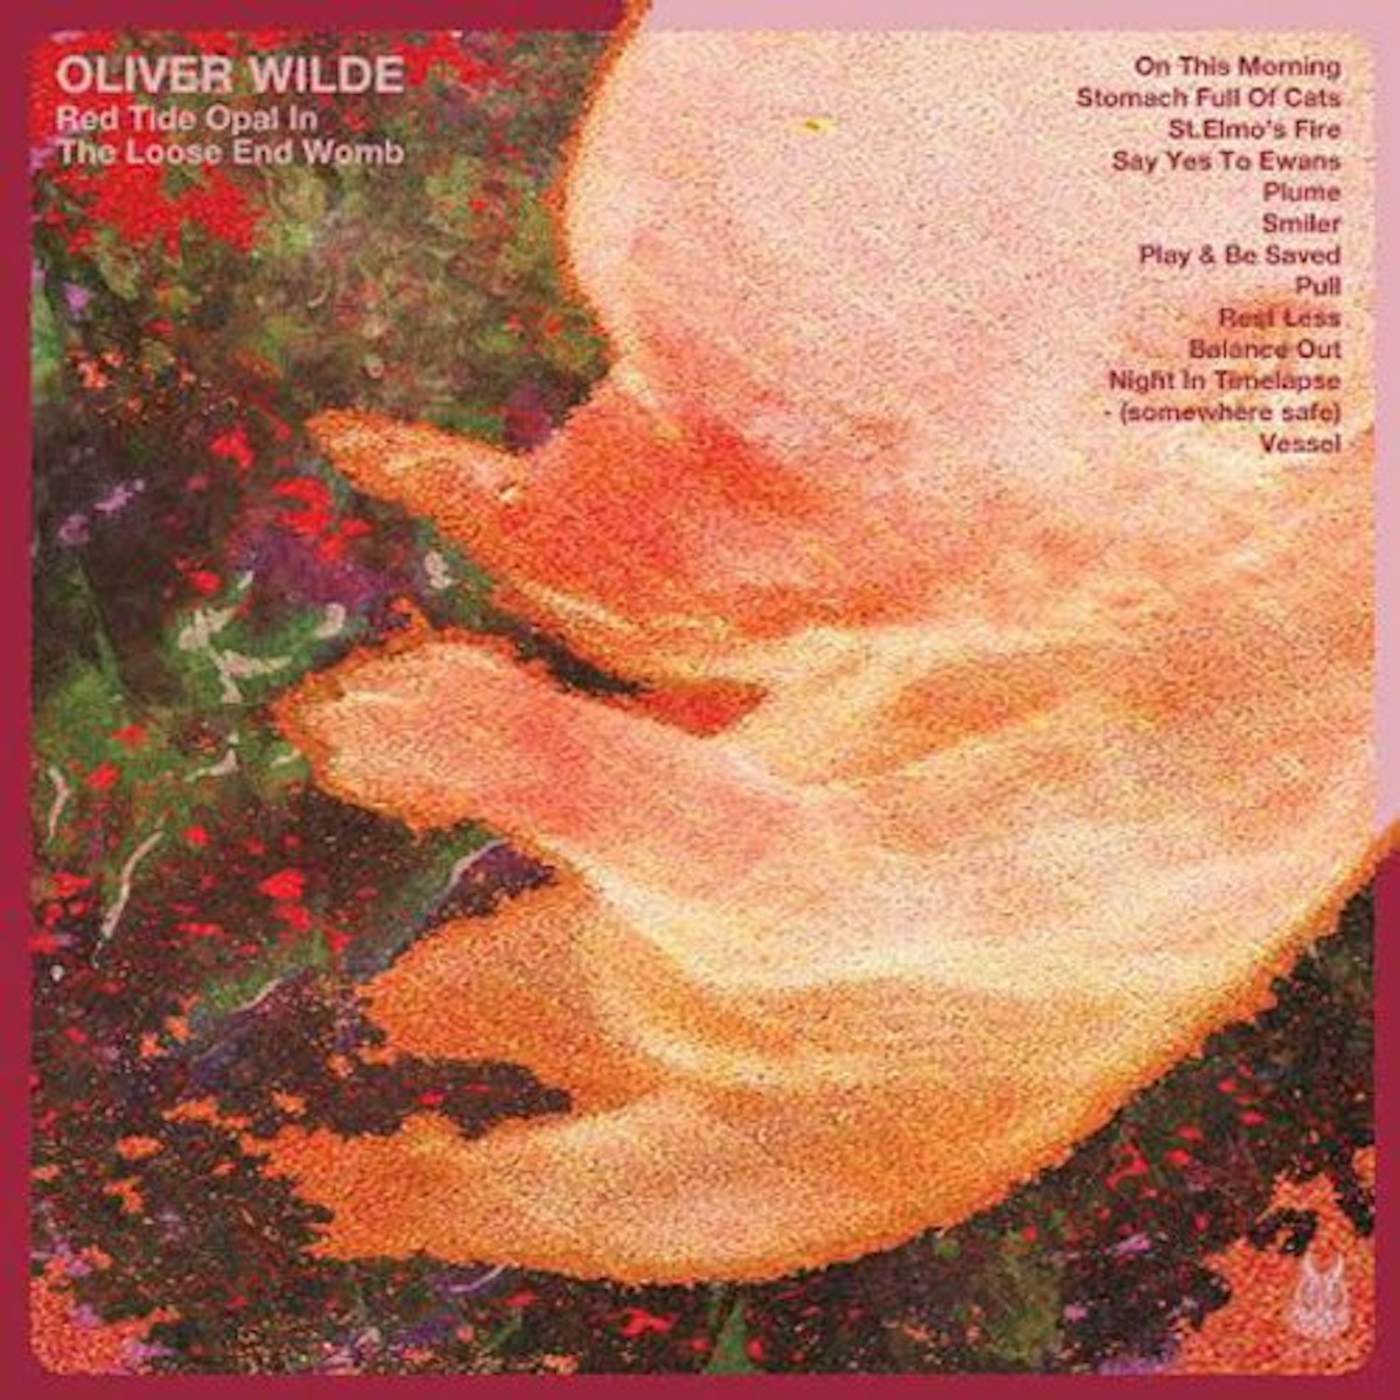 Oliver Wilde RED TIDE OPAL IN THE LOOSE END CD